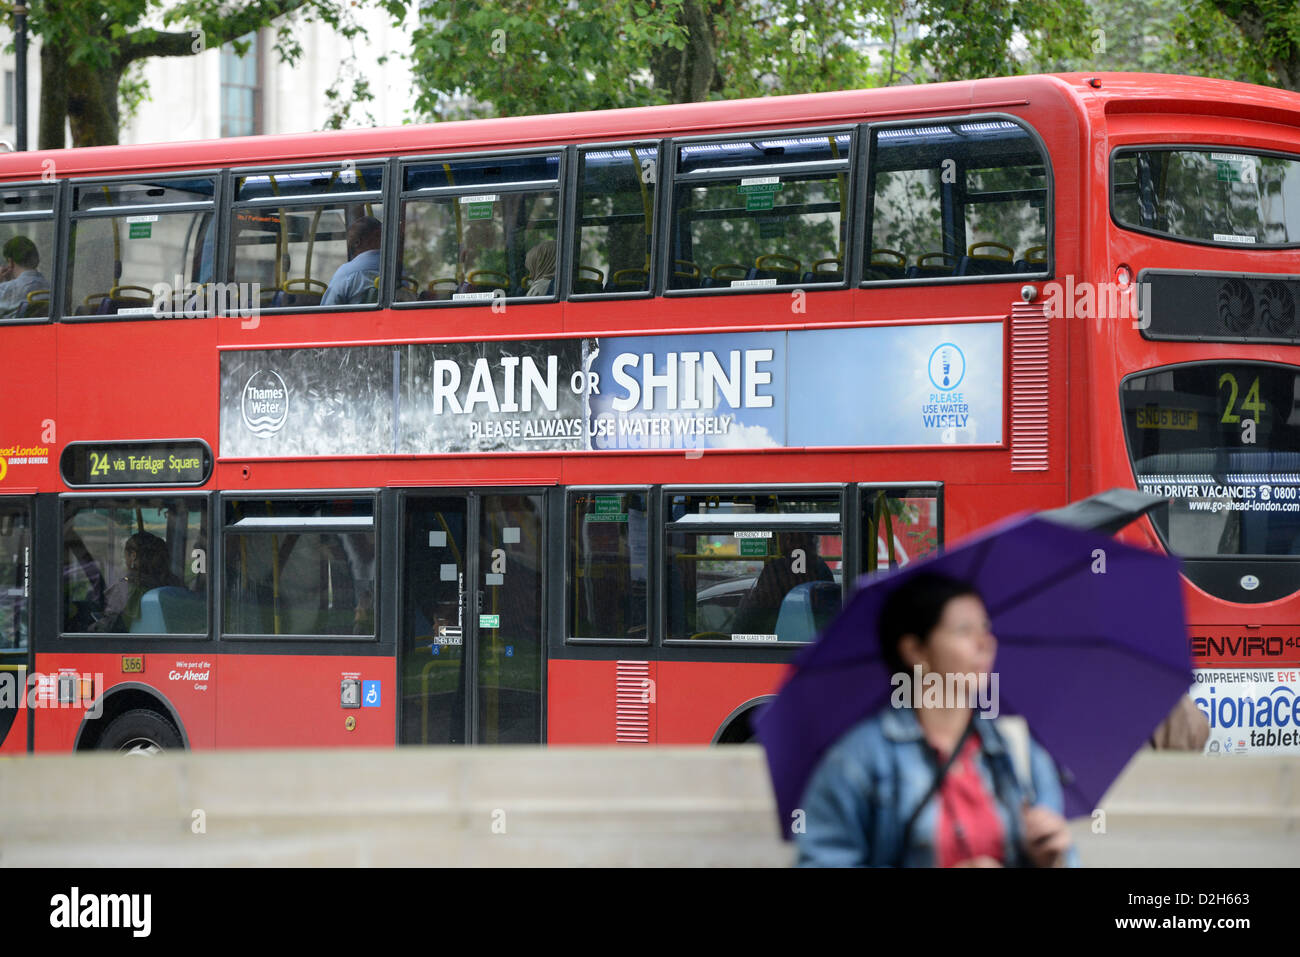 Bus in London with Rain or Shine sign Stock Photo